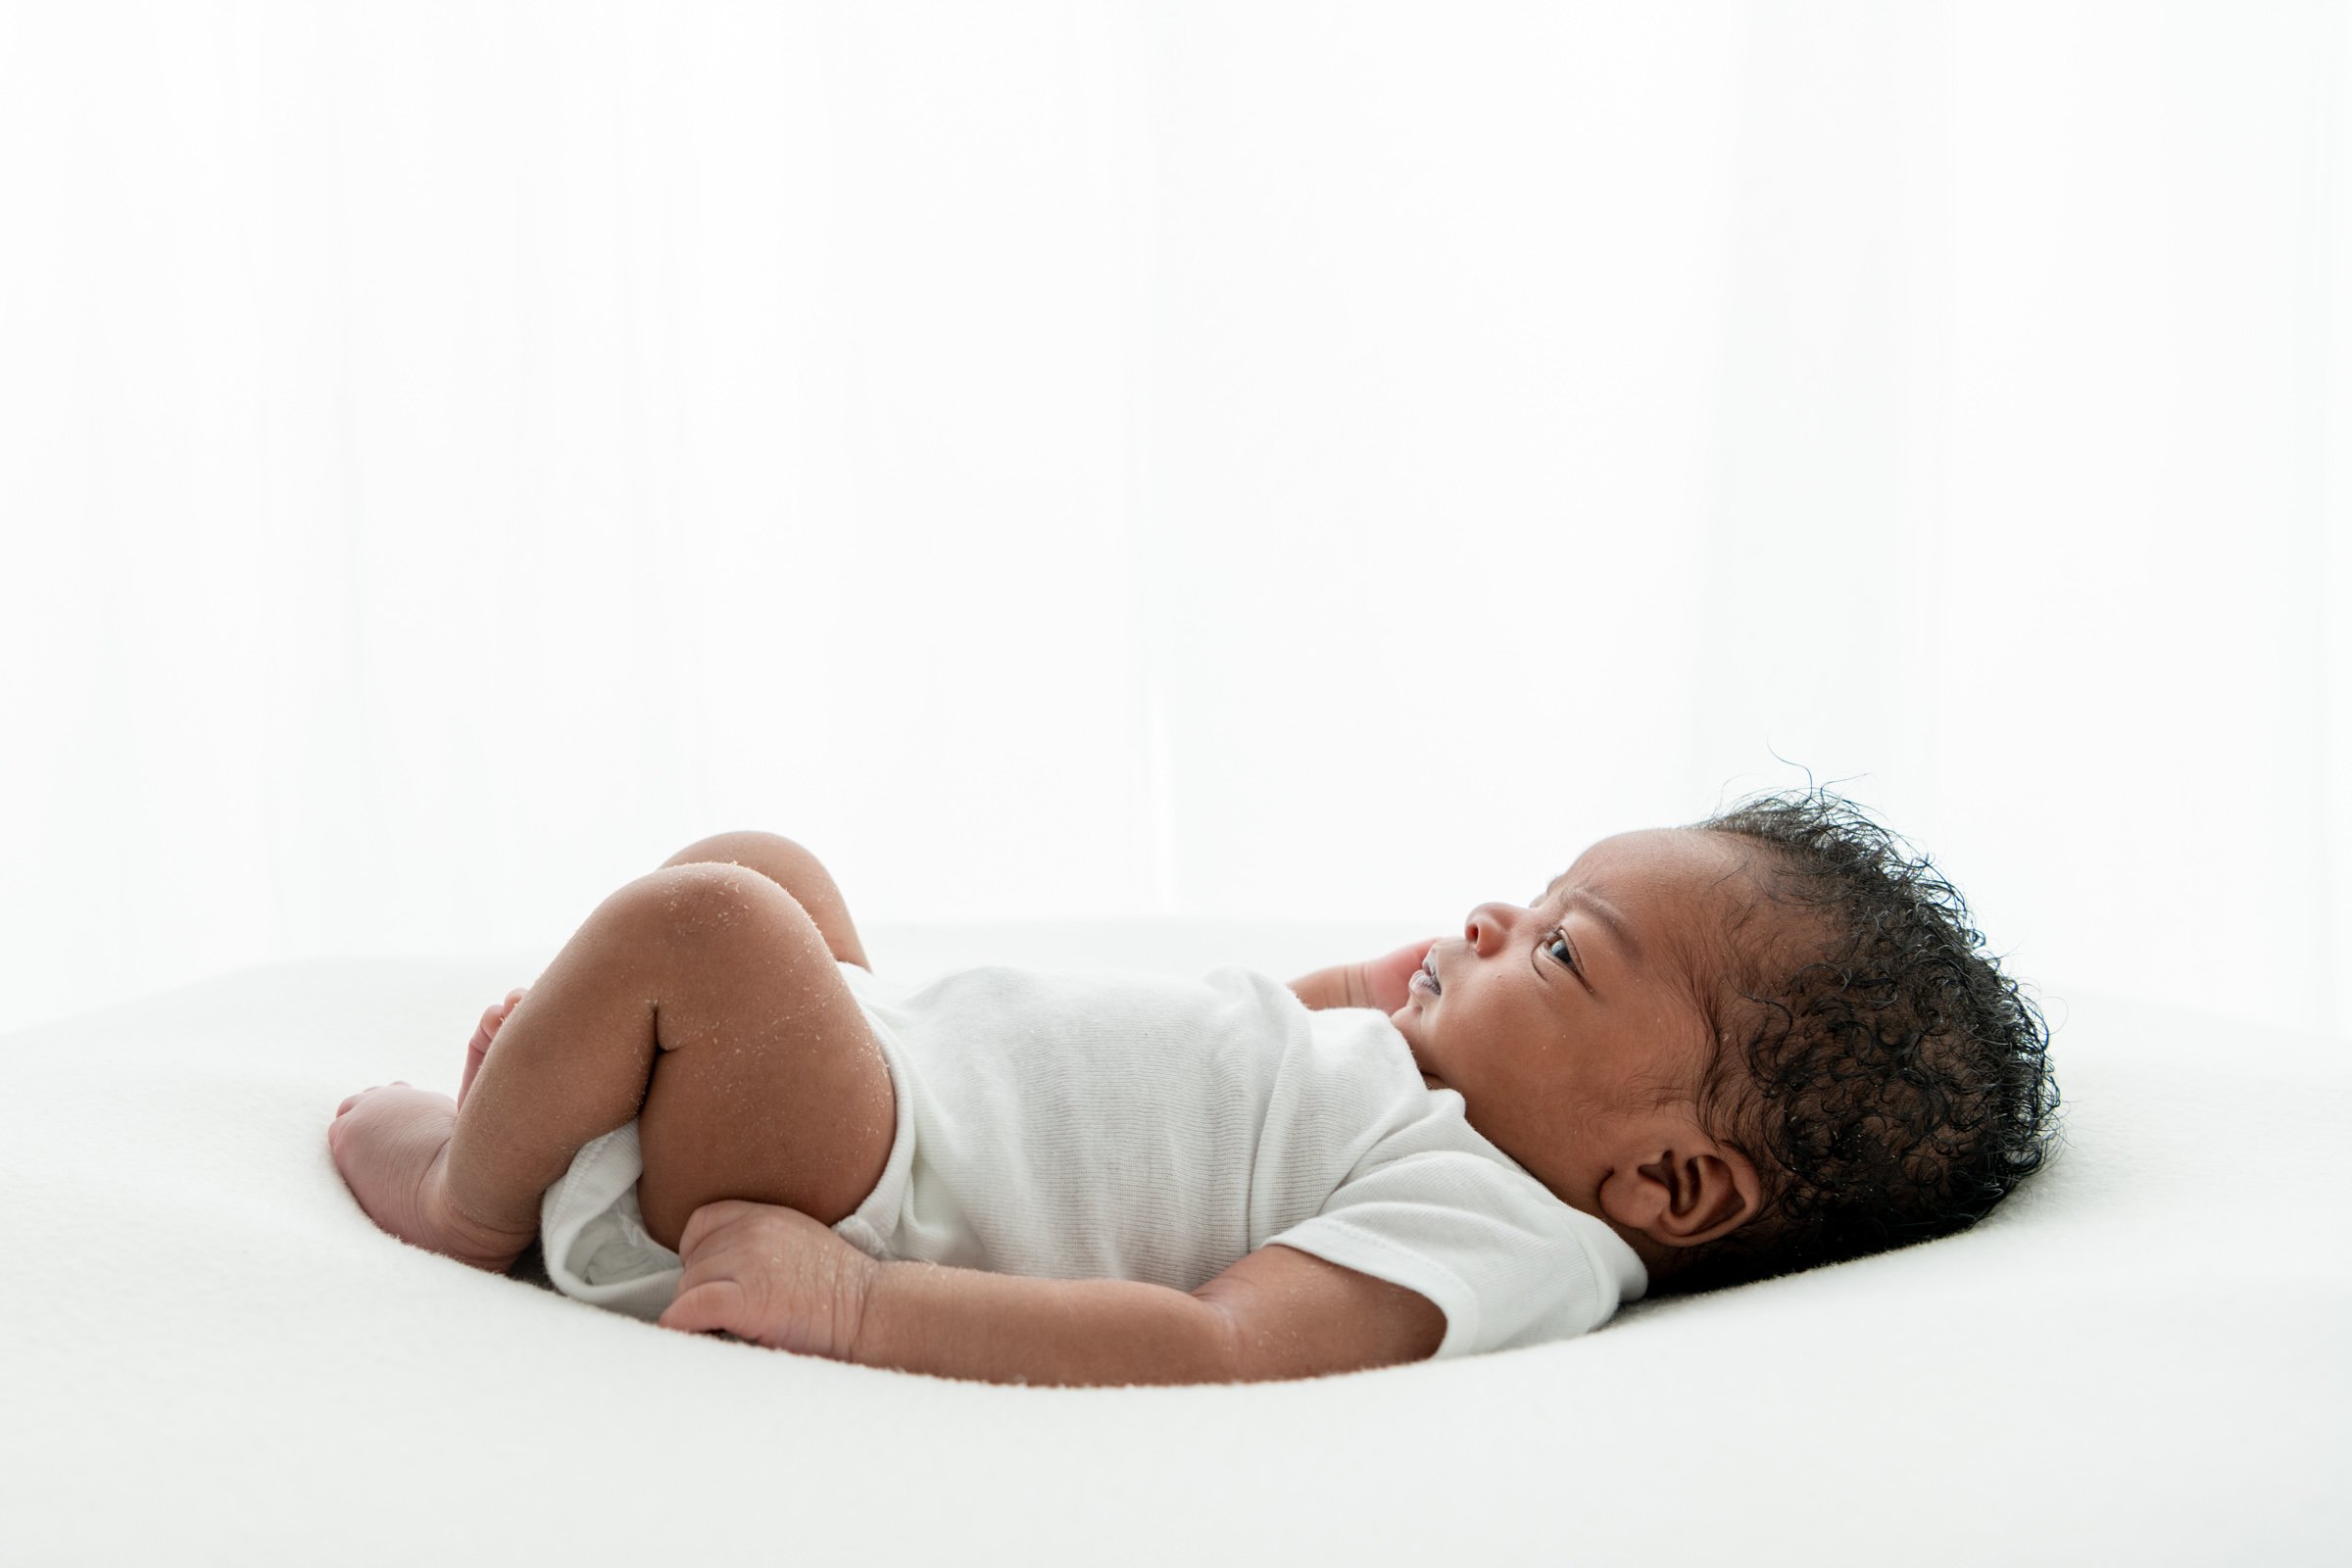  Nicole Hawkins Photography of the New Jersey area captures a profile portrait of a newborn in a studio. side profile of baby studio portraits #nicolehawkinsphotography #NJbabyphotography #newbornportraits #NewJerseyStudioPhotography #newbornsession 